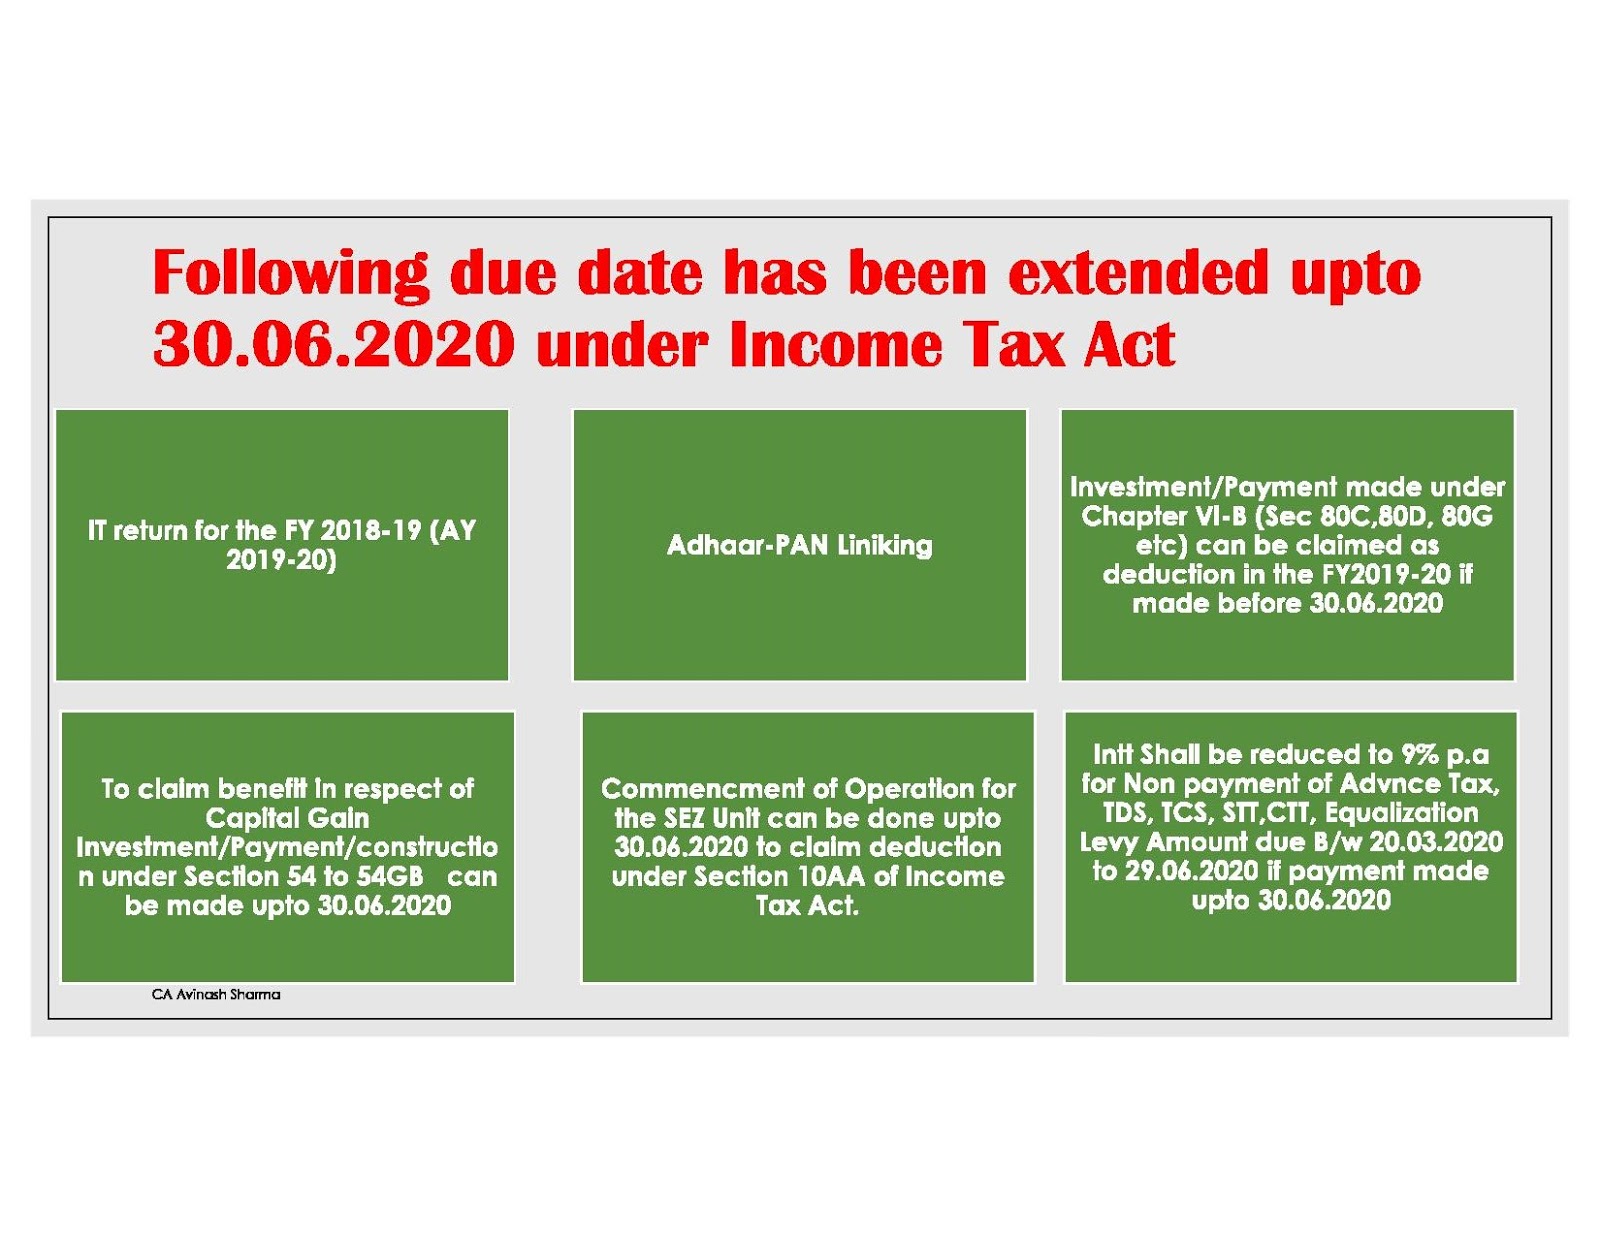 Rebates And Reliefs Under Income Tax Act